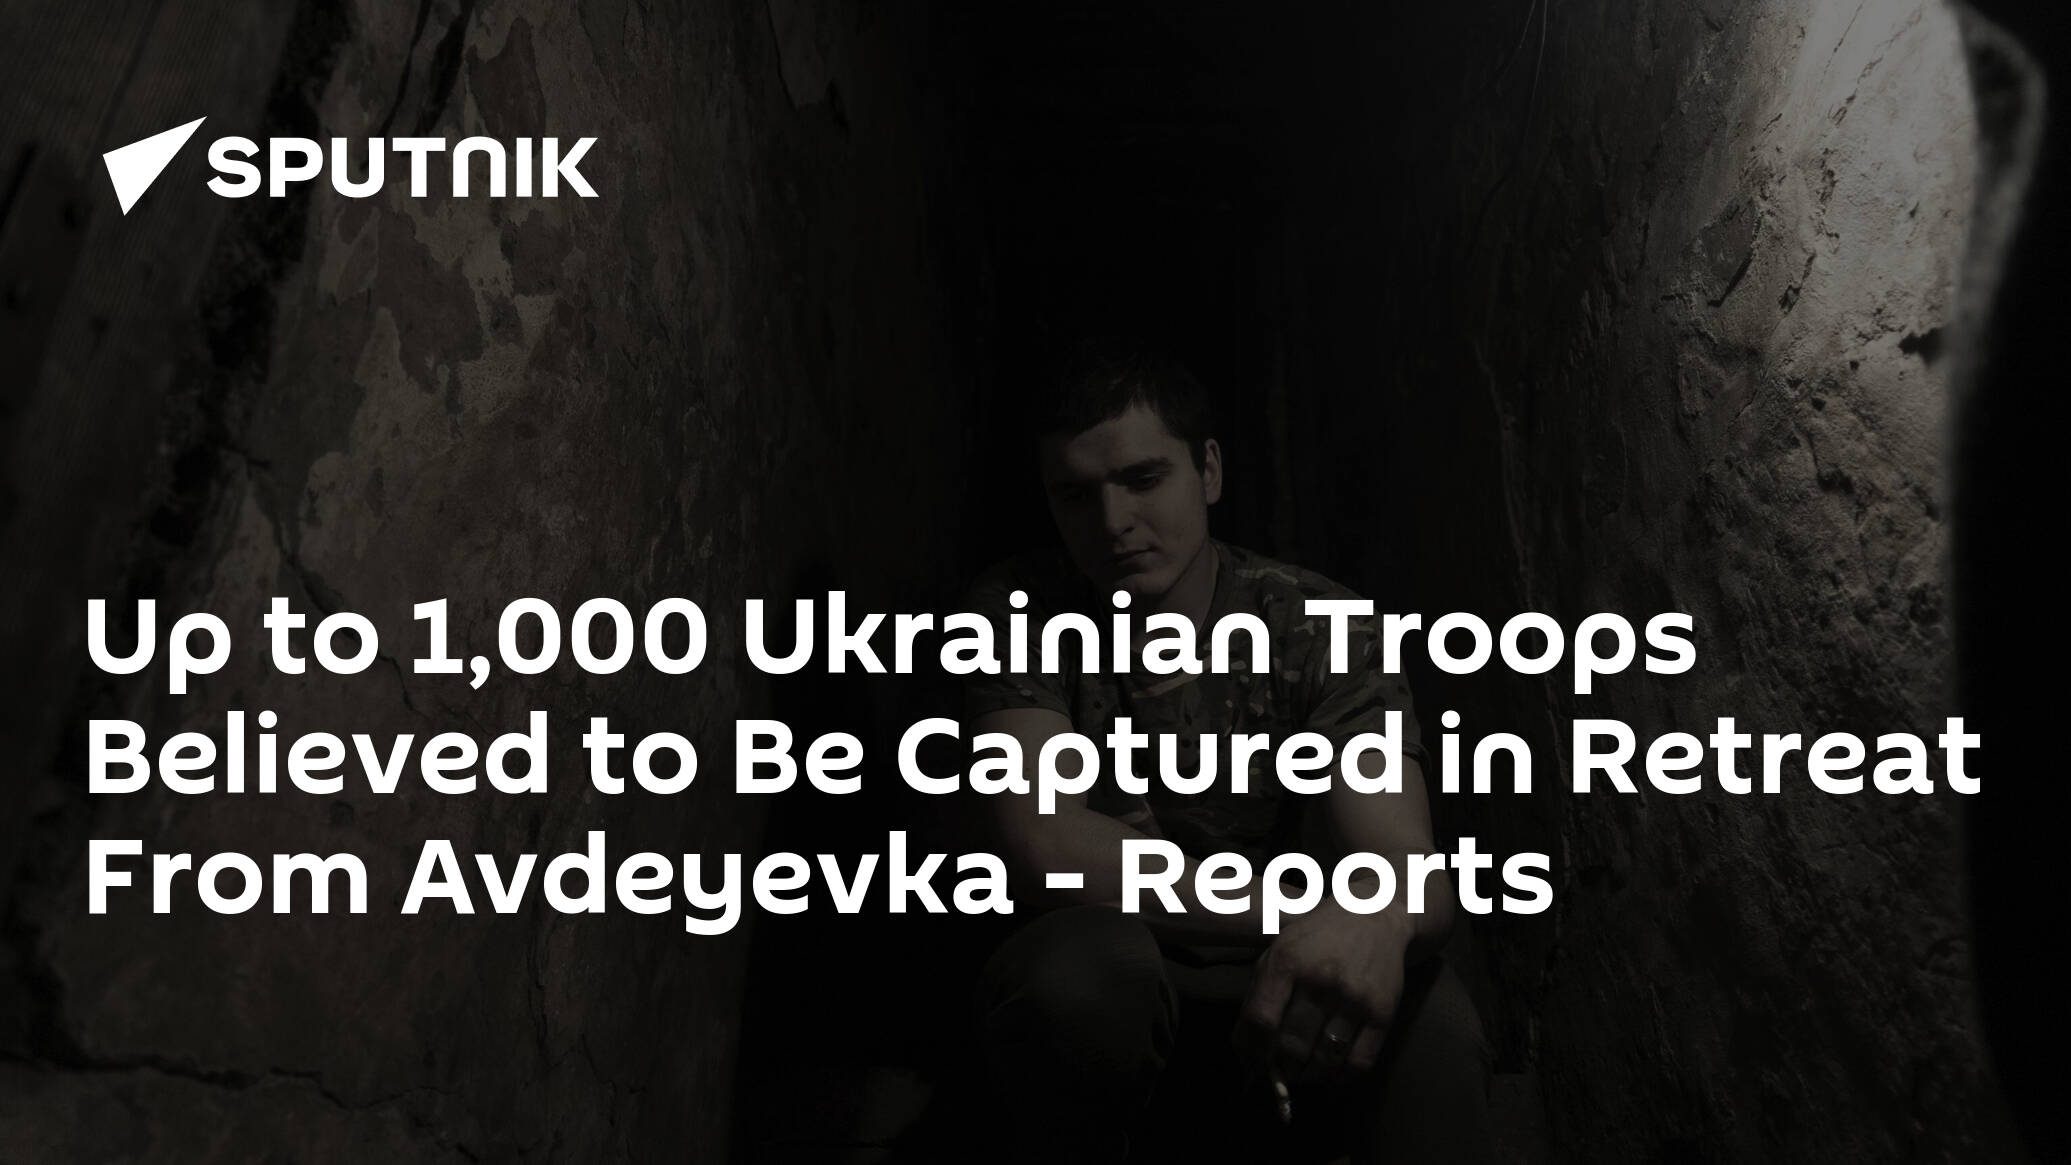 Up to 1,000 Ukrainian Troops Believed to Be Captured in Retreat From Avdeyevka – Reports